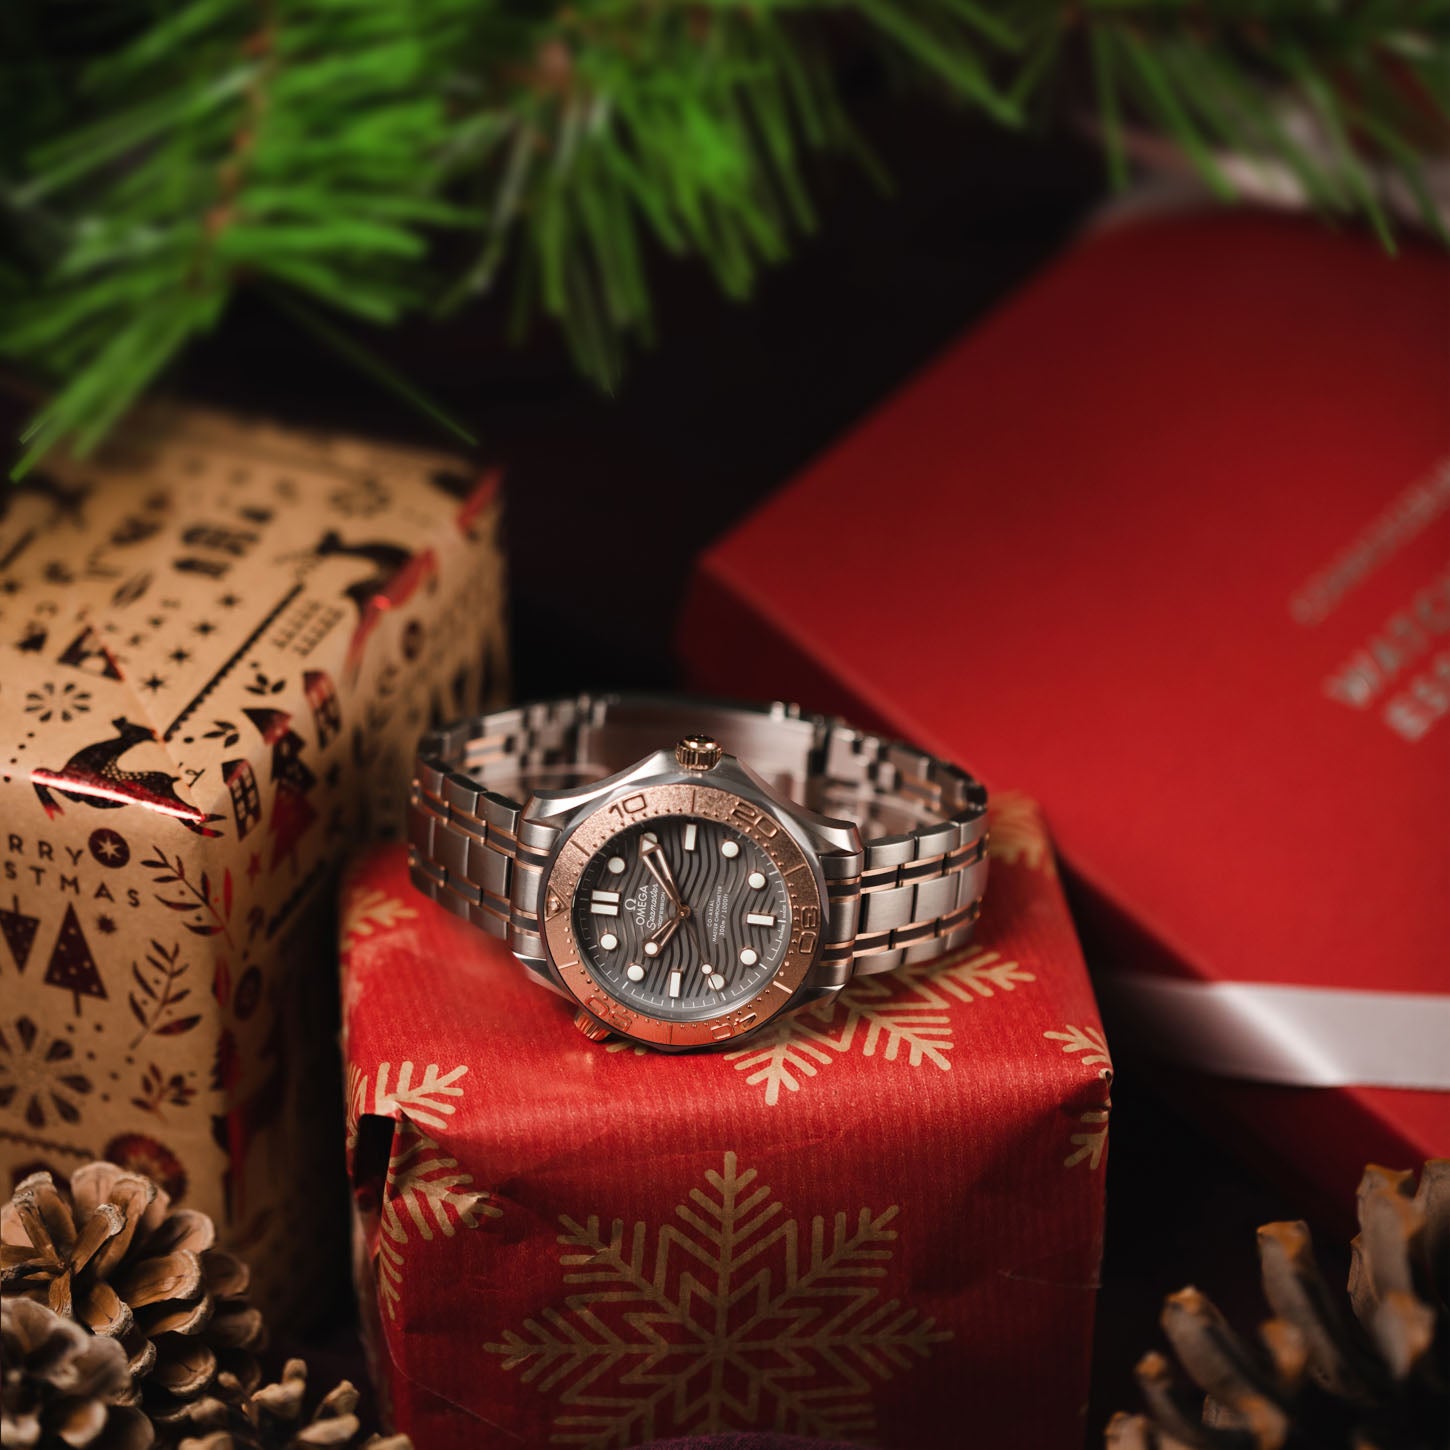 CMF Watch Pro Gets New Christmas Watch Faces